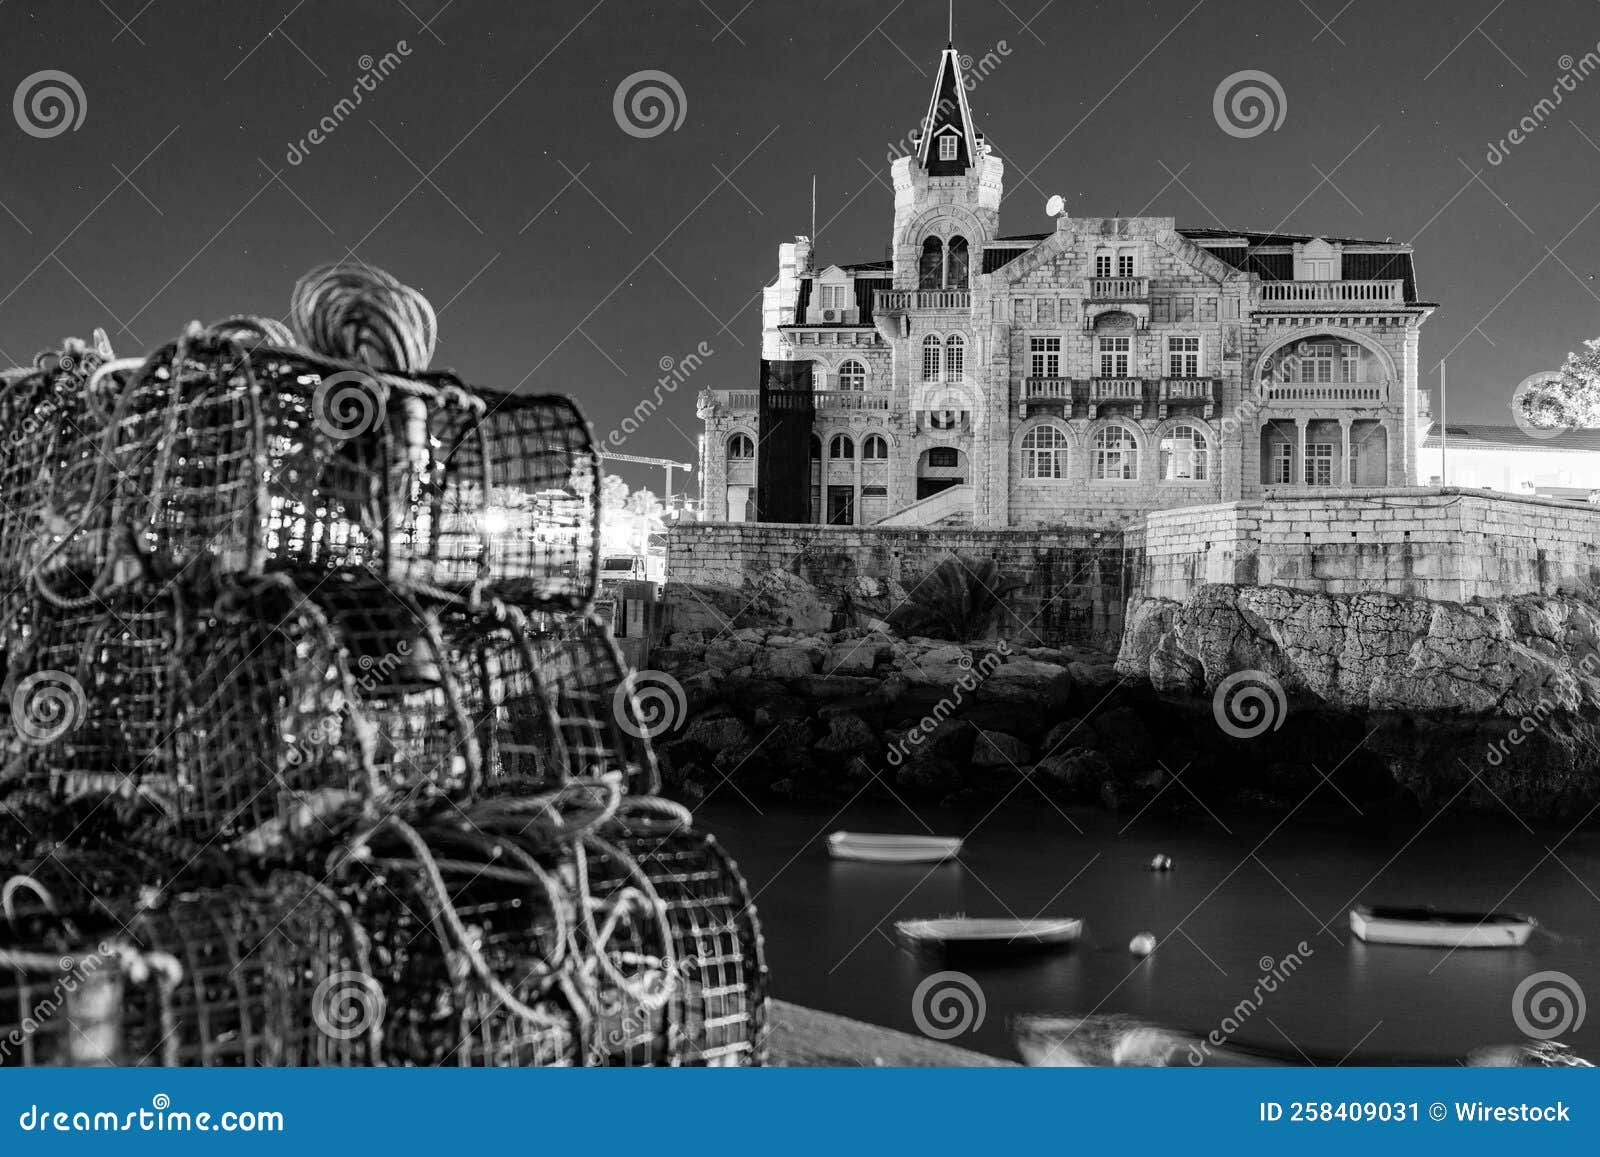 grayscale of beautiful palacete seixas in cascais seen through blurred fishing nets